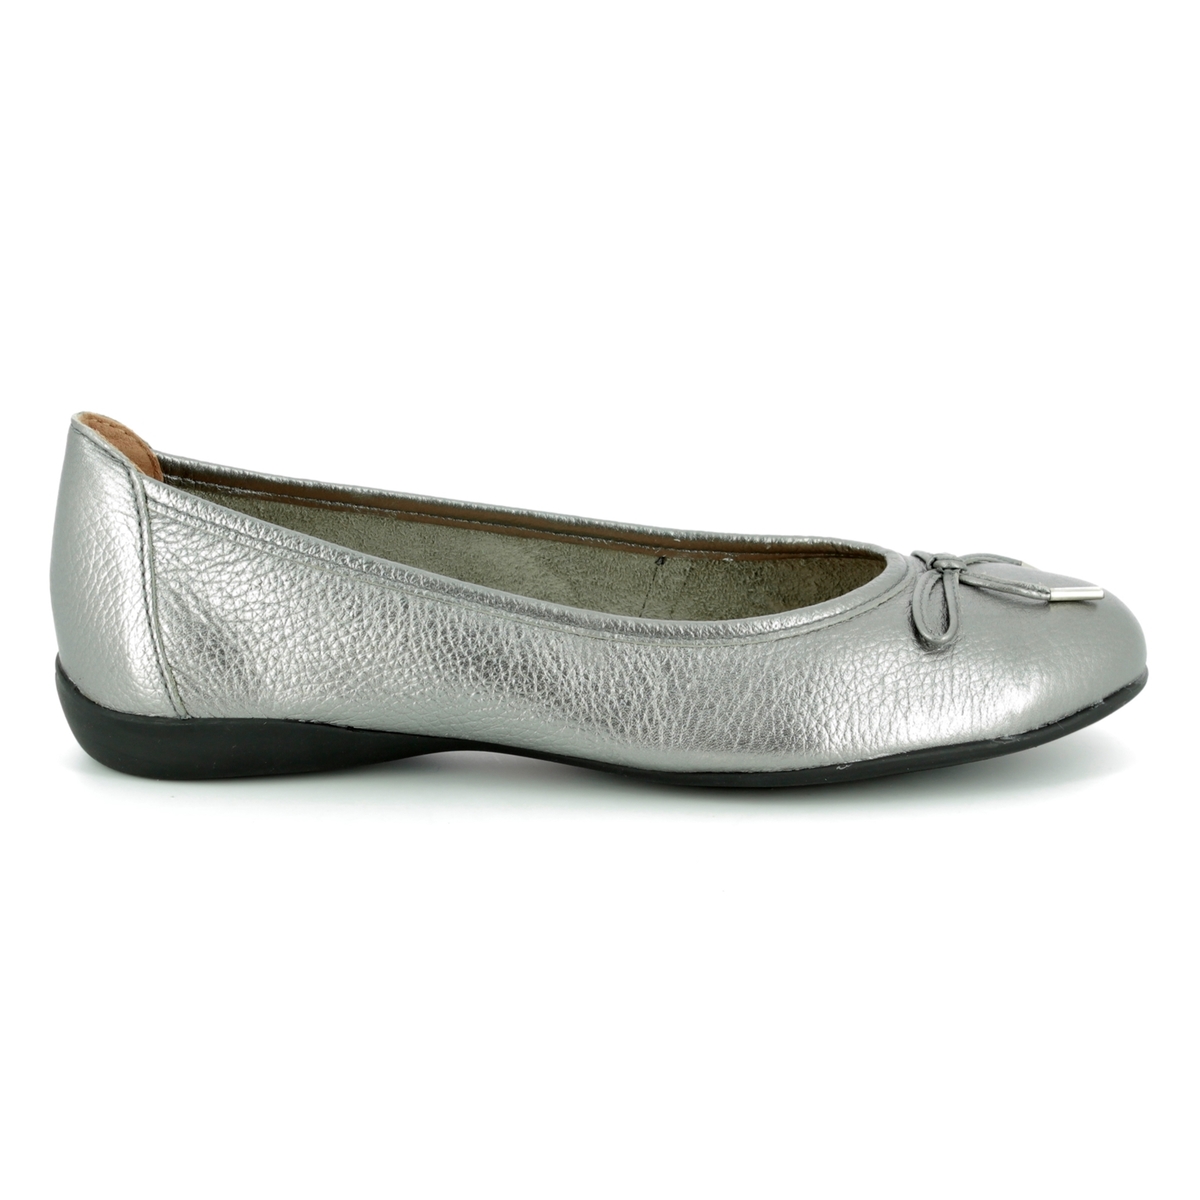 Begg Shoes Gambi M6536-00 Pewter pumps